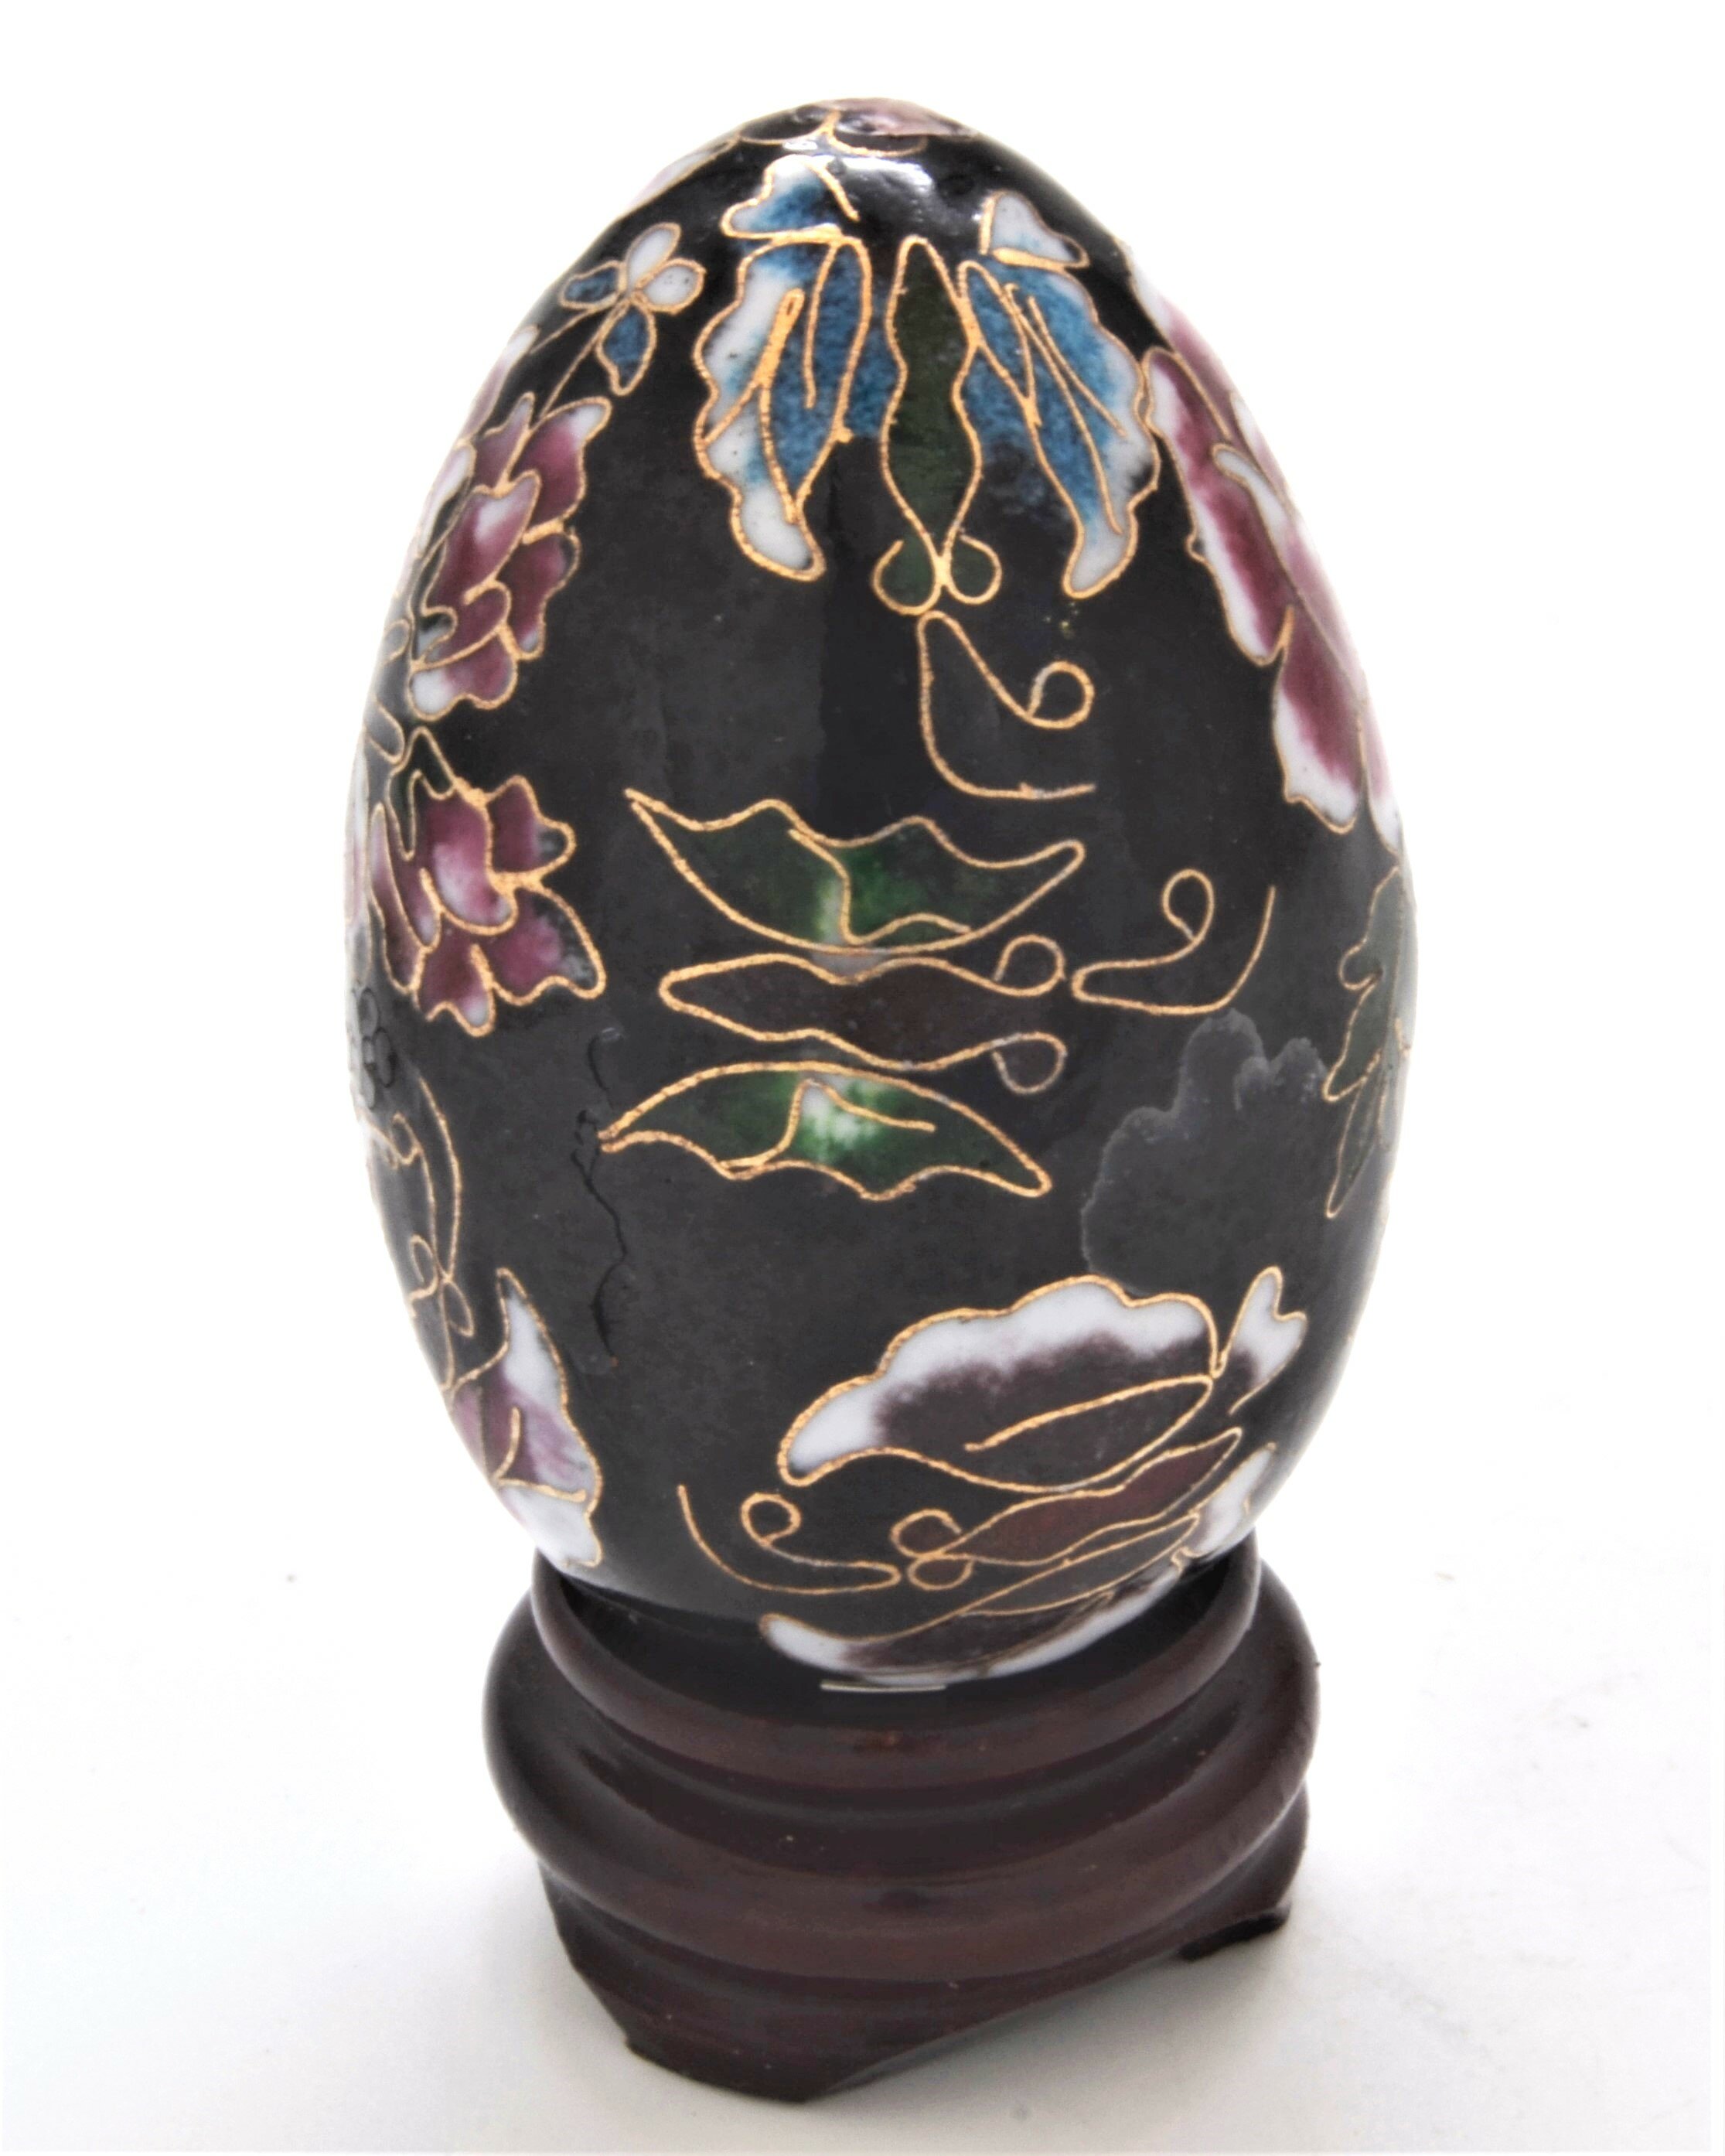 4" Wooden Easter Egg on a Stand Pysanka w/ Purple Floral Pattern Made in Russia